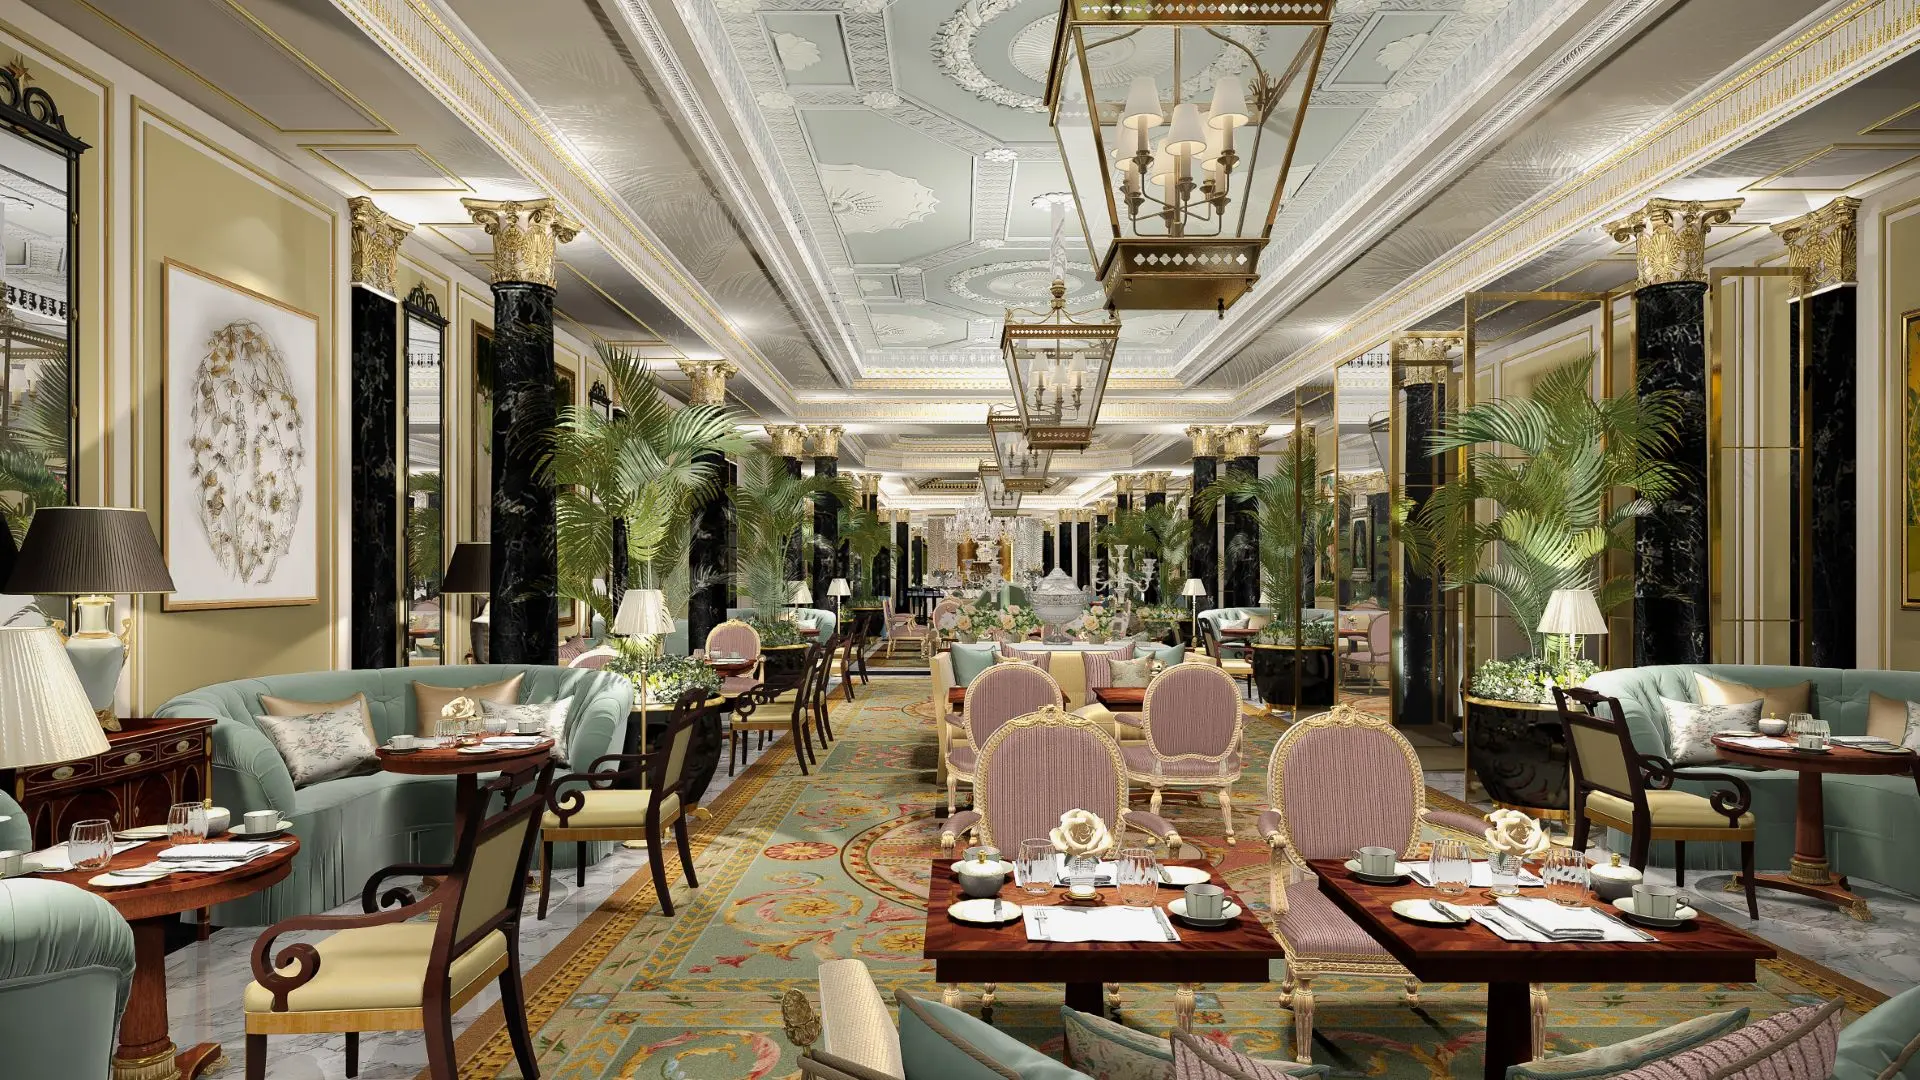 The_Dorchester_rendering_of_The_Promenade_Pierre-Yves_Rochon_Large_.jpg